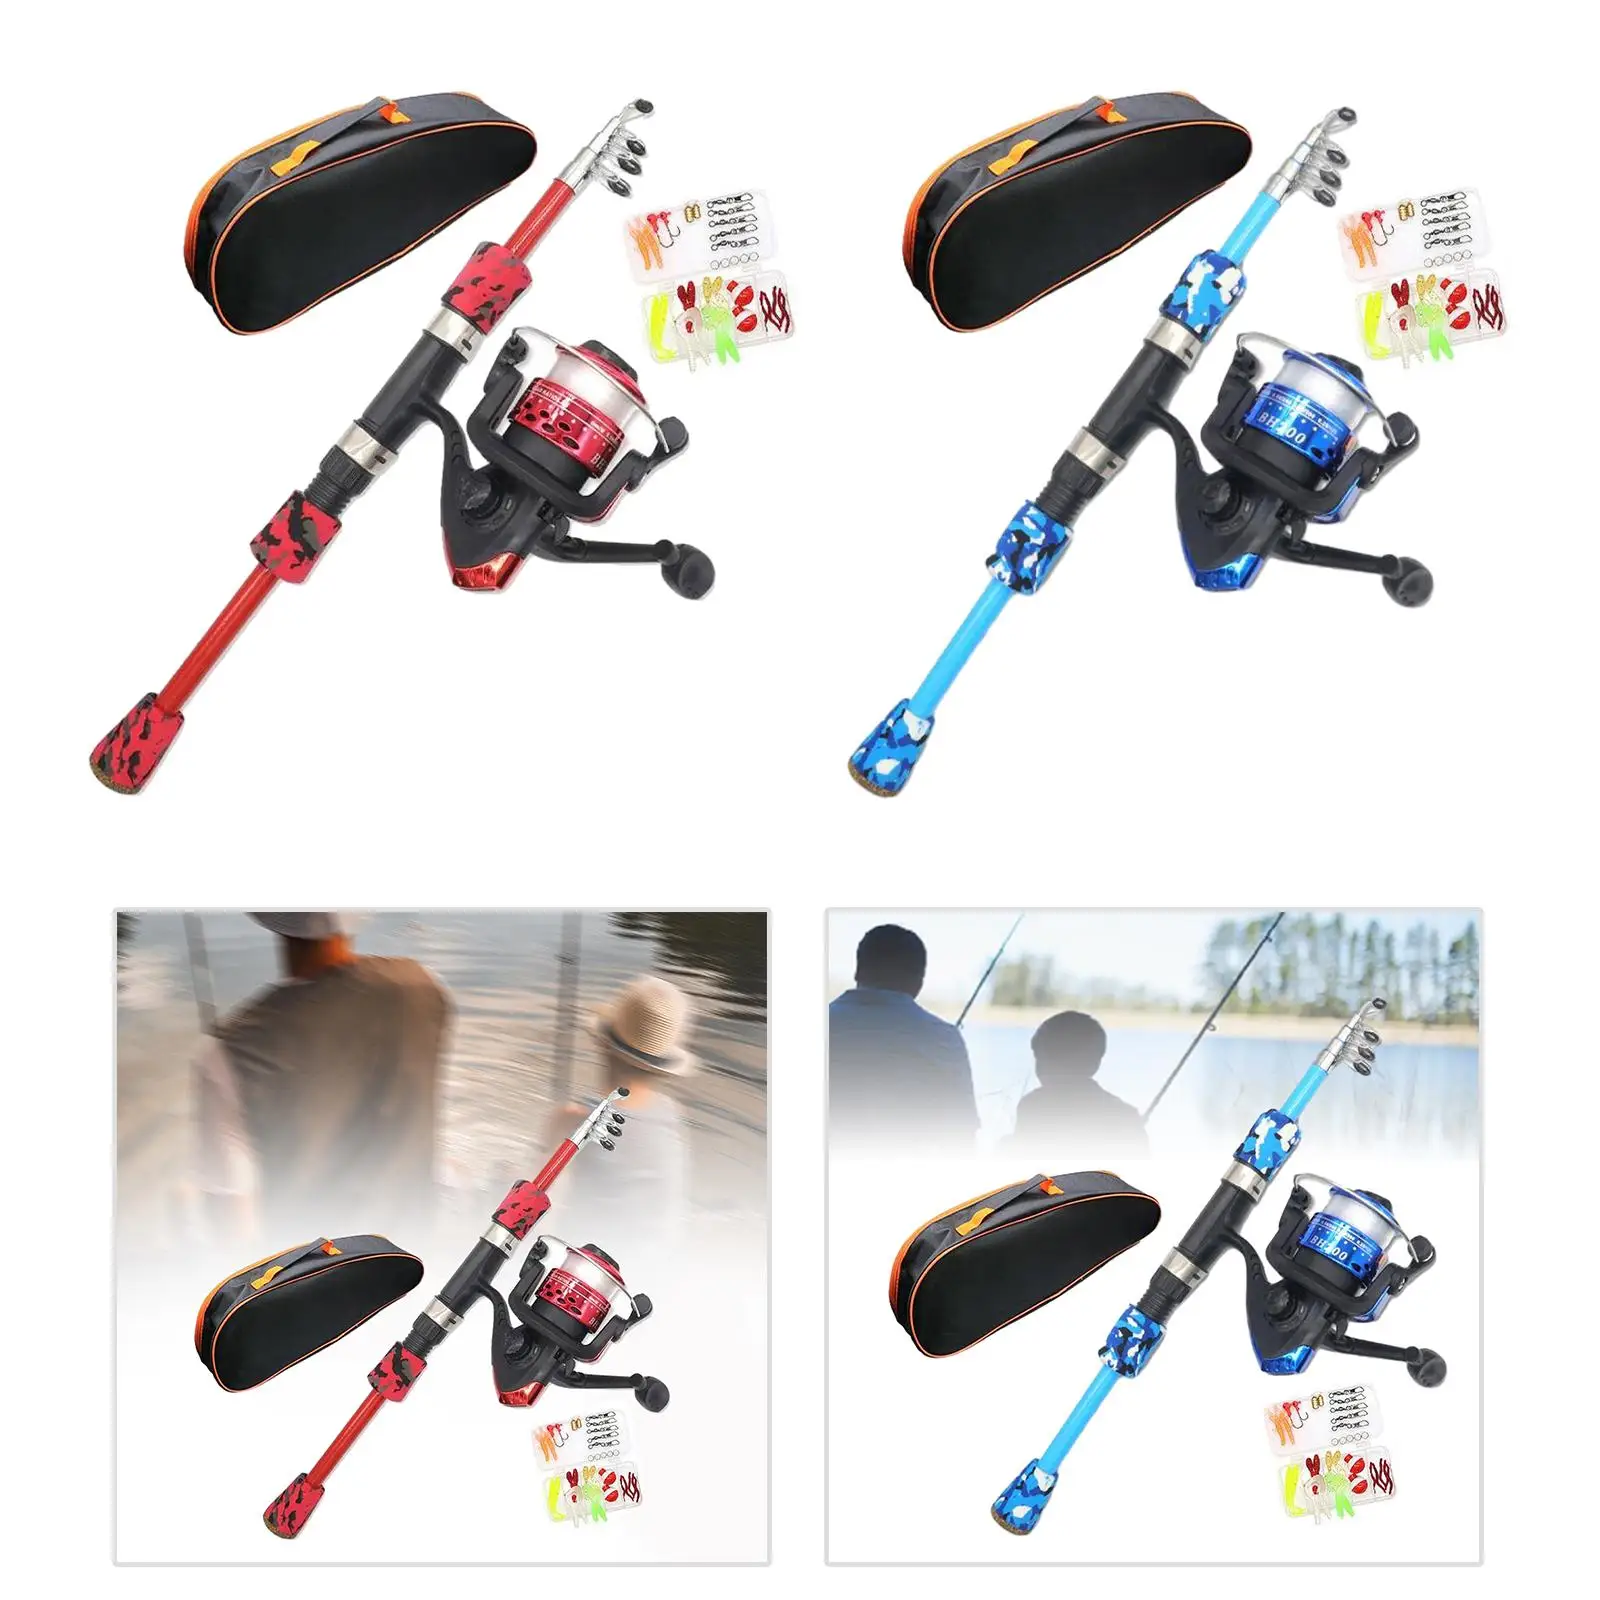 Kids Fishing Rod and Reel Combo Outdoor with Carrier Bag Complete Fishing Rod Set for Starter Beginners Children Birthday Gifts